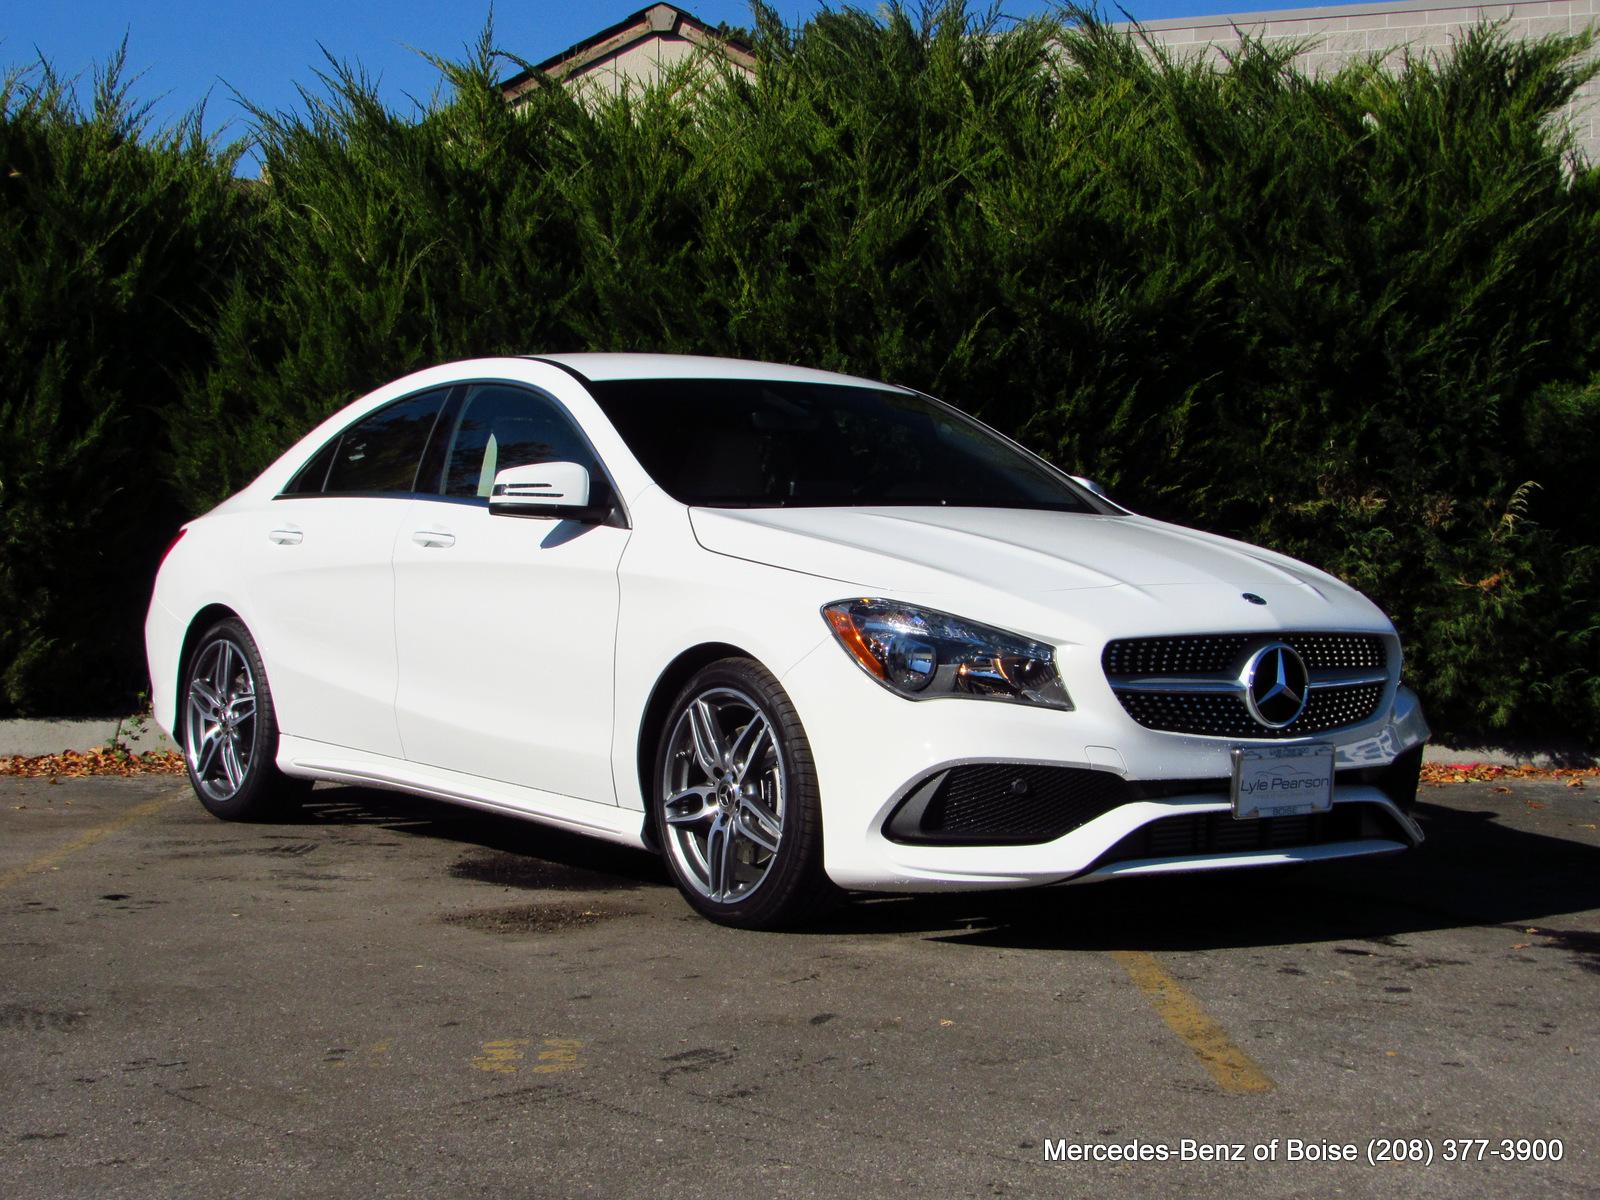 New 2019 Mercedes-Benz CLA CLA 250 4MATIC® Coupe Coupe in Boise #19M6997 | Lyle Pearson Auto Group